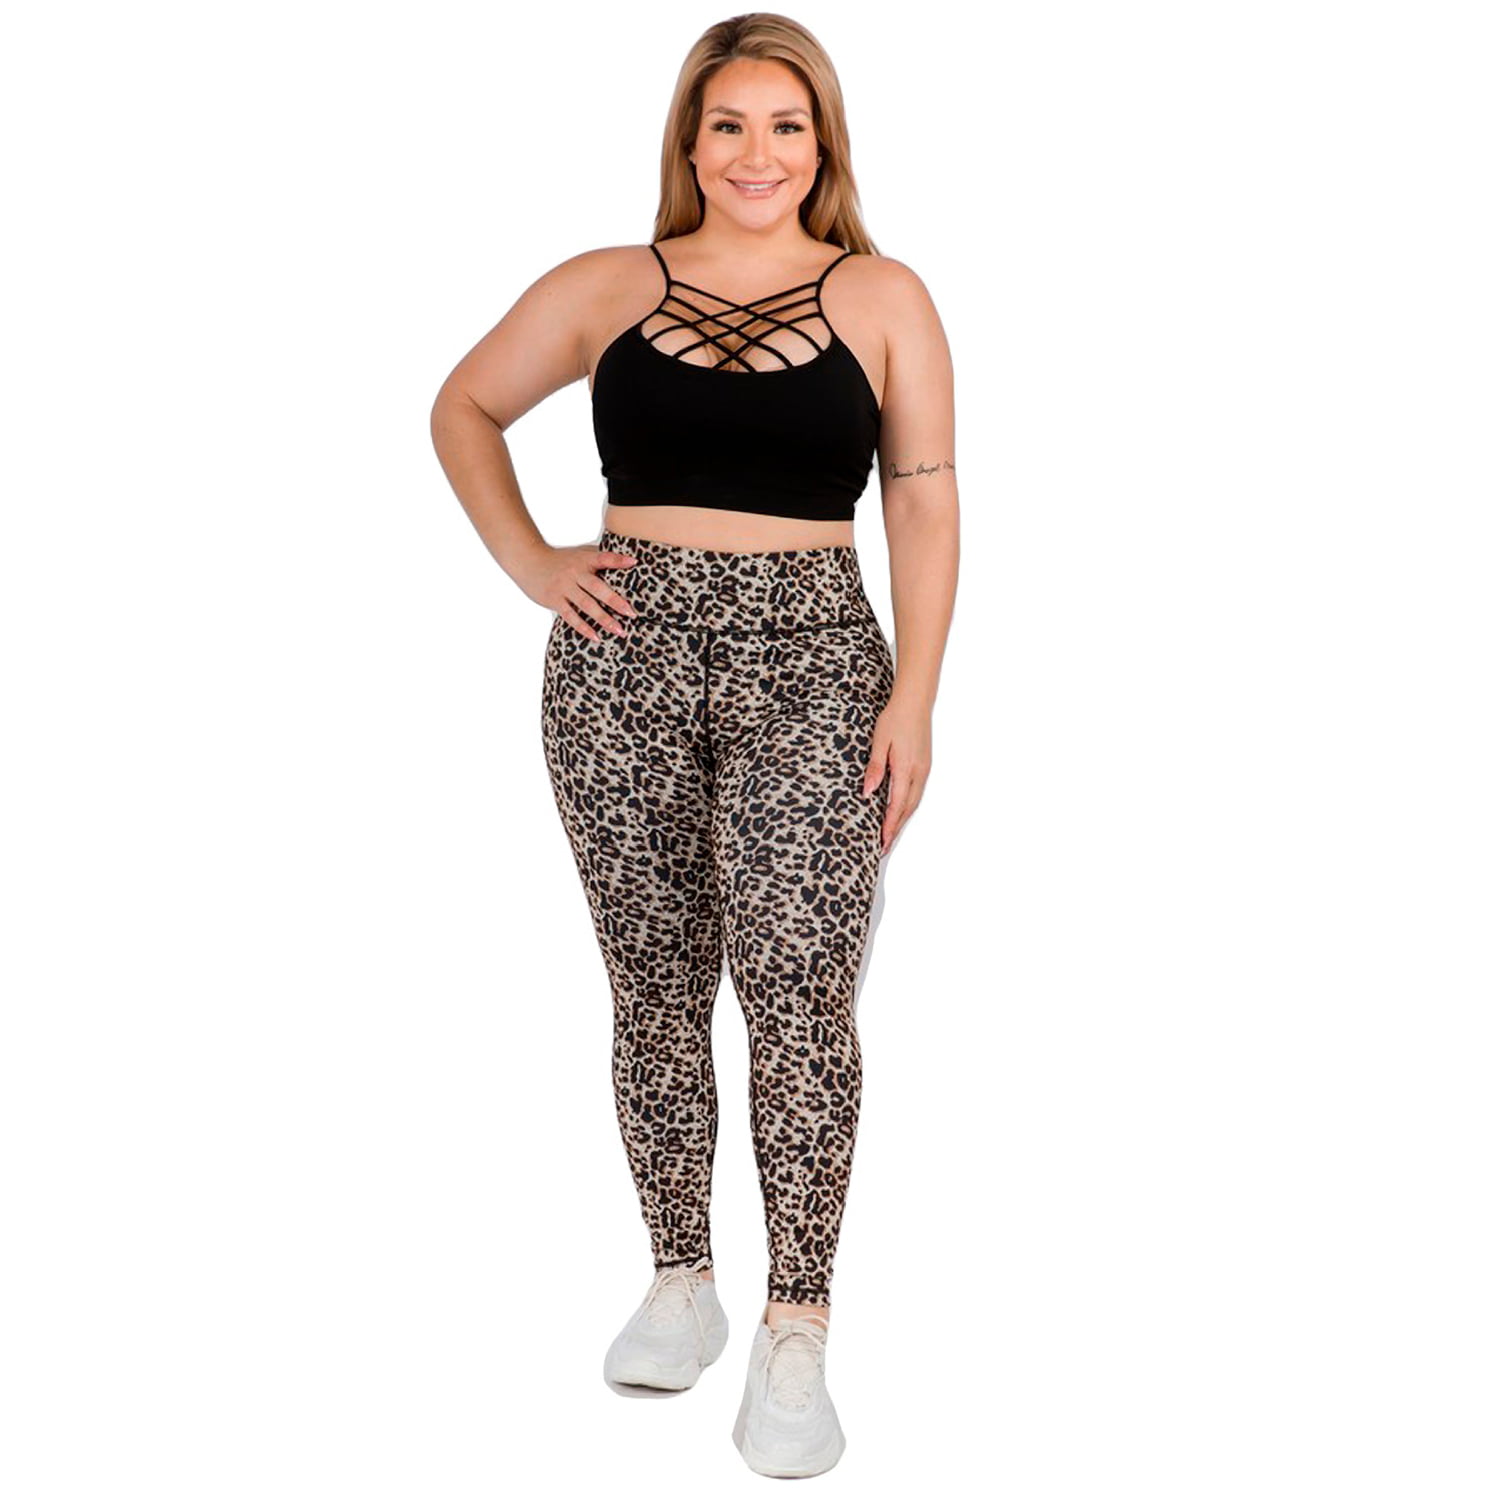 30 Minute Cheetah workout leggings with Comfort Workout Clothes